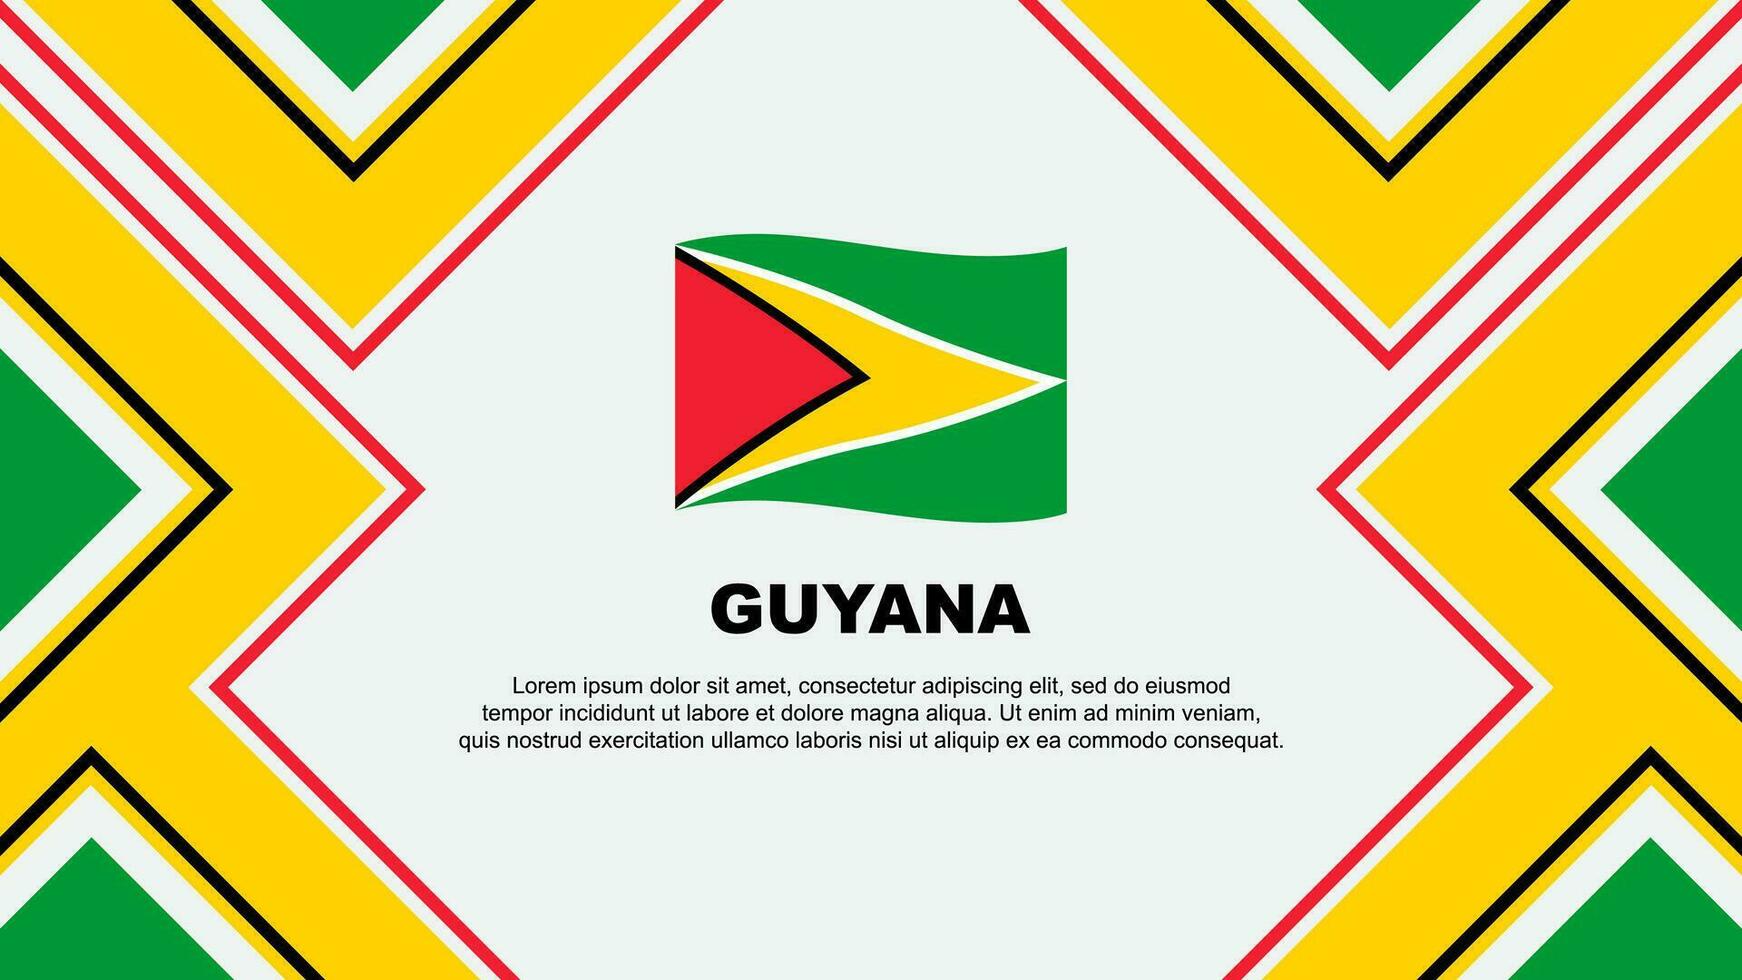 Guyana Flag Abstract Background Design Template. Guyana Independence Day Banner Wallpaper Vector Illustration. Guyana Vector